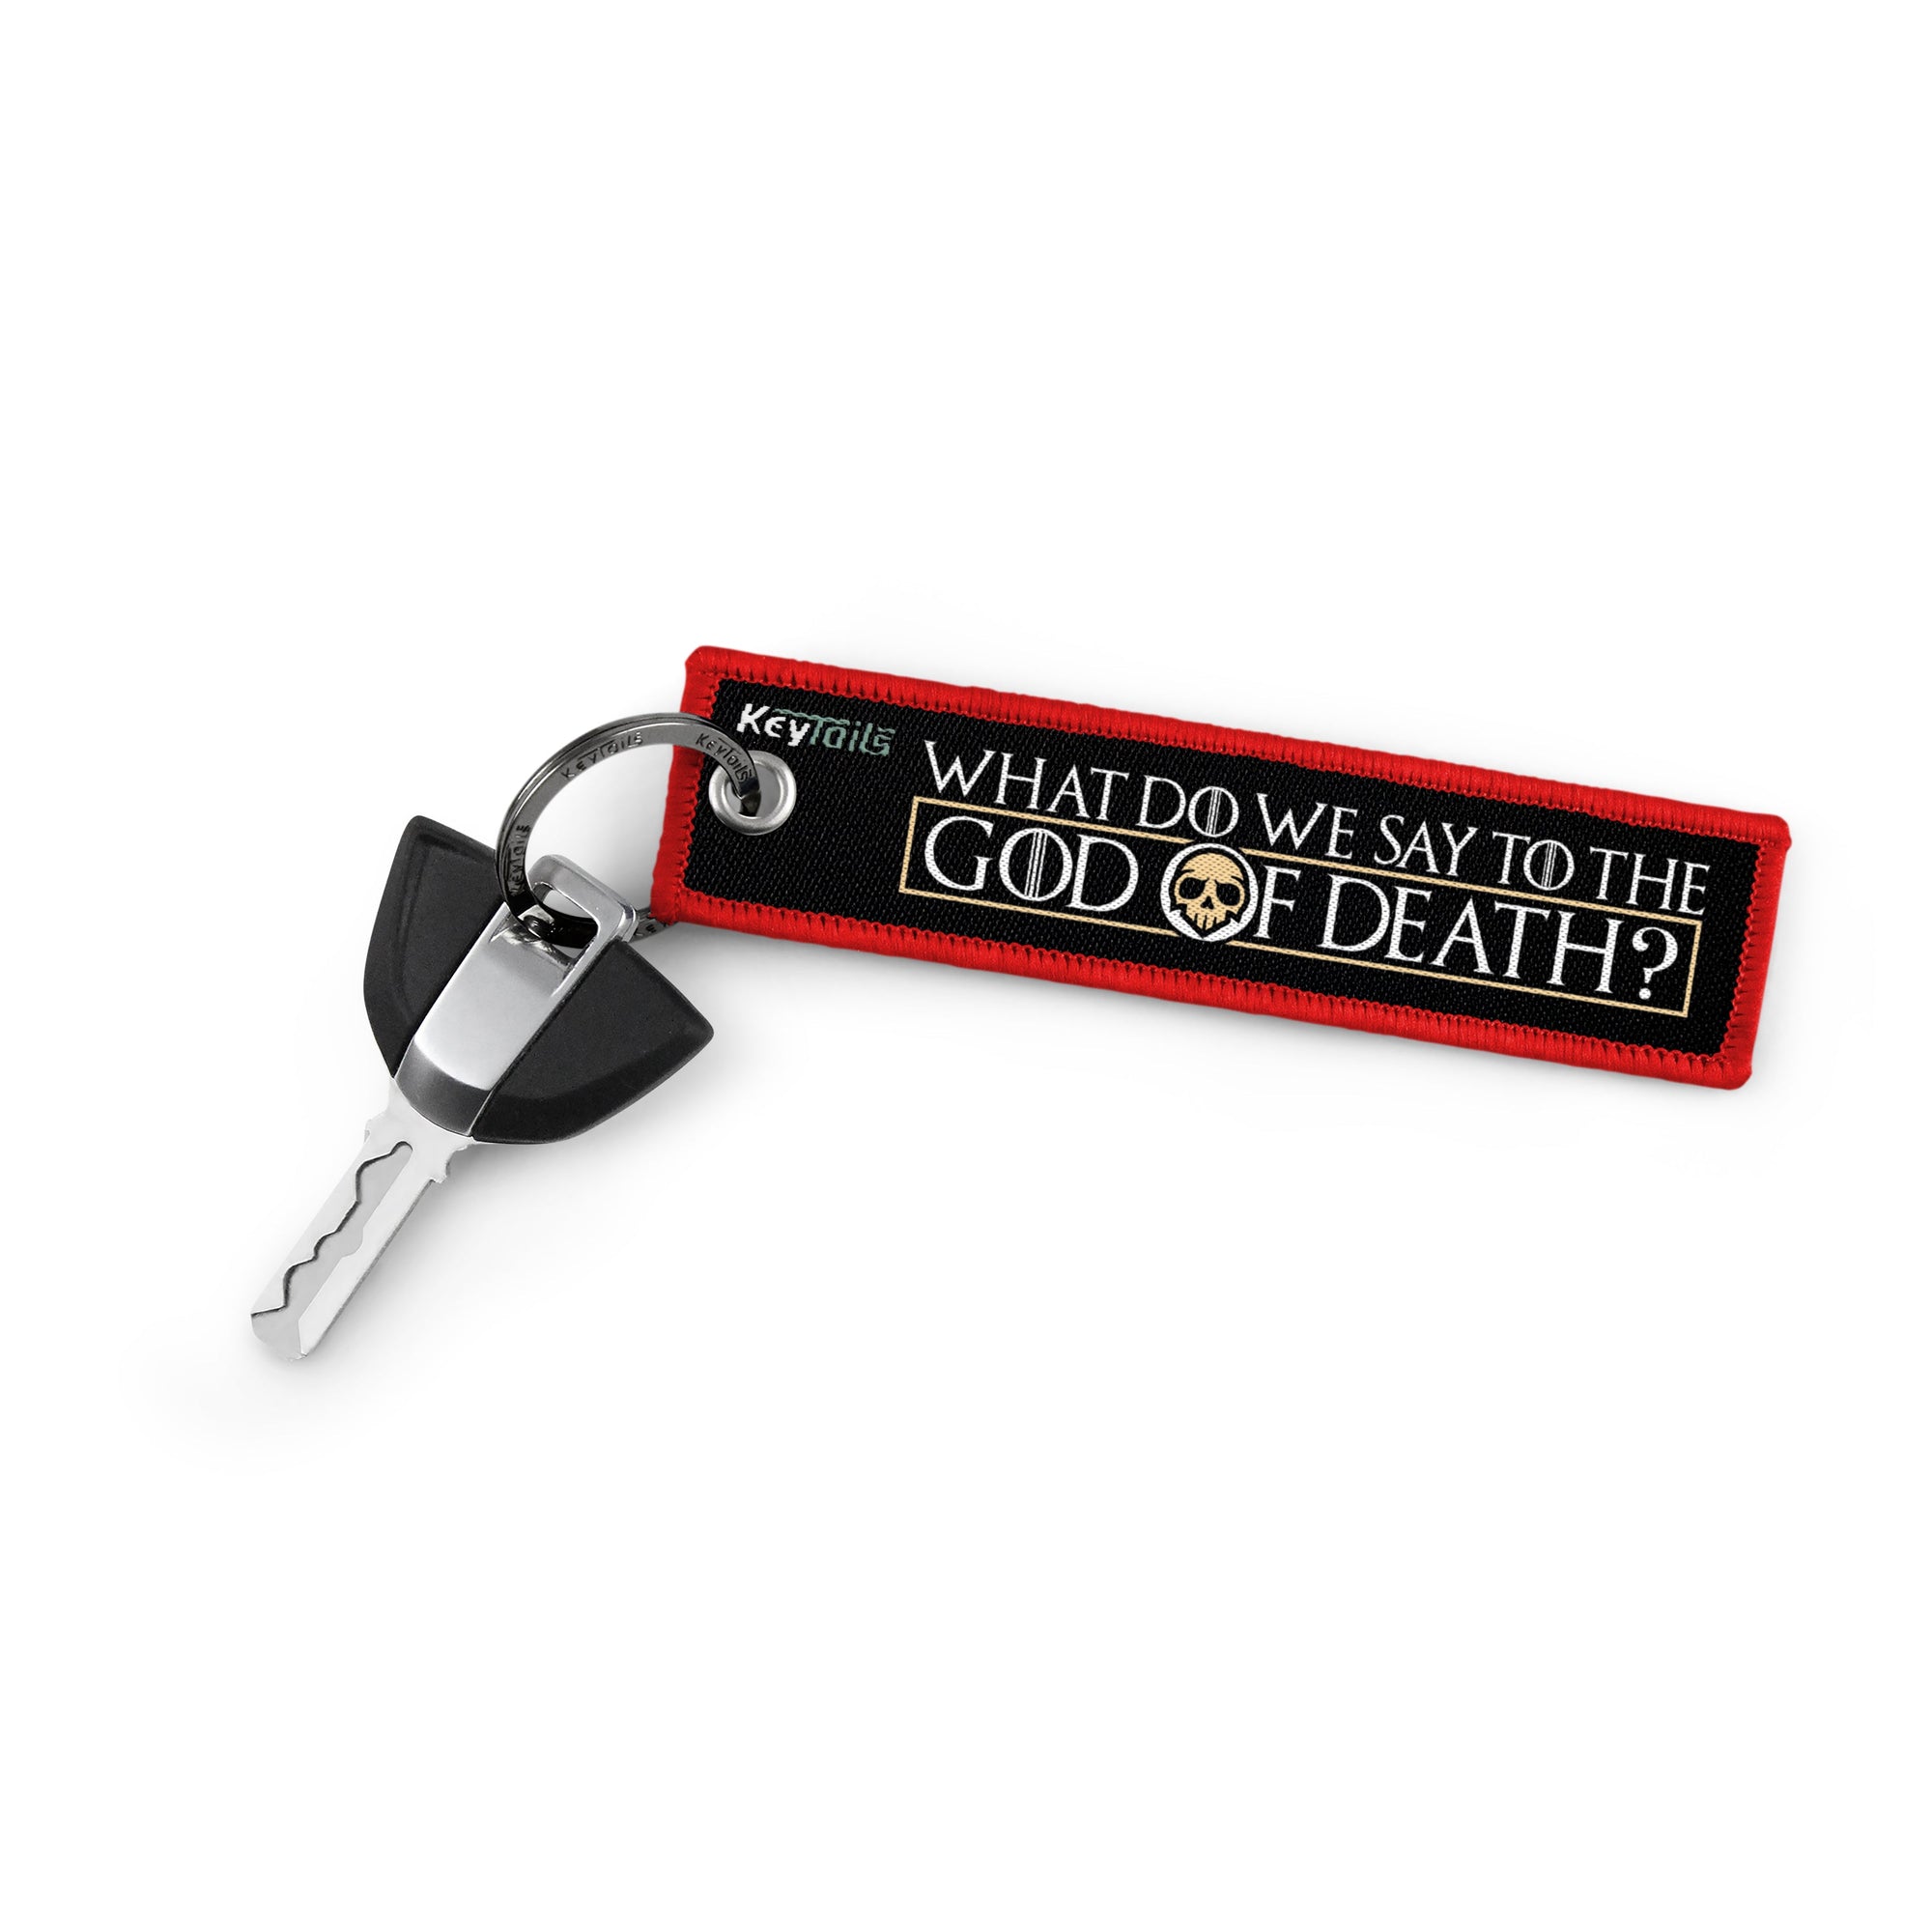 What Do We Say To The God Of Death? Not Today Keychain, Key Tag - Red